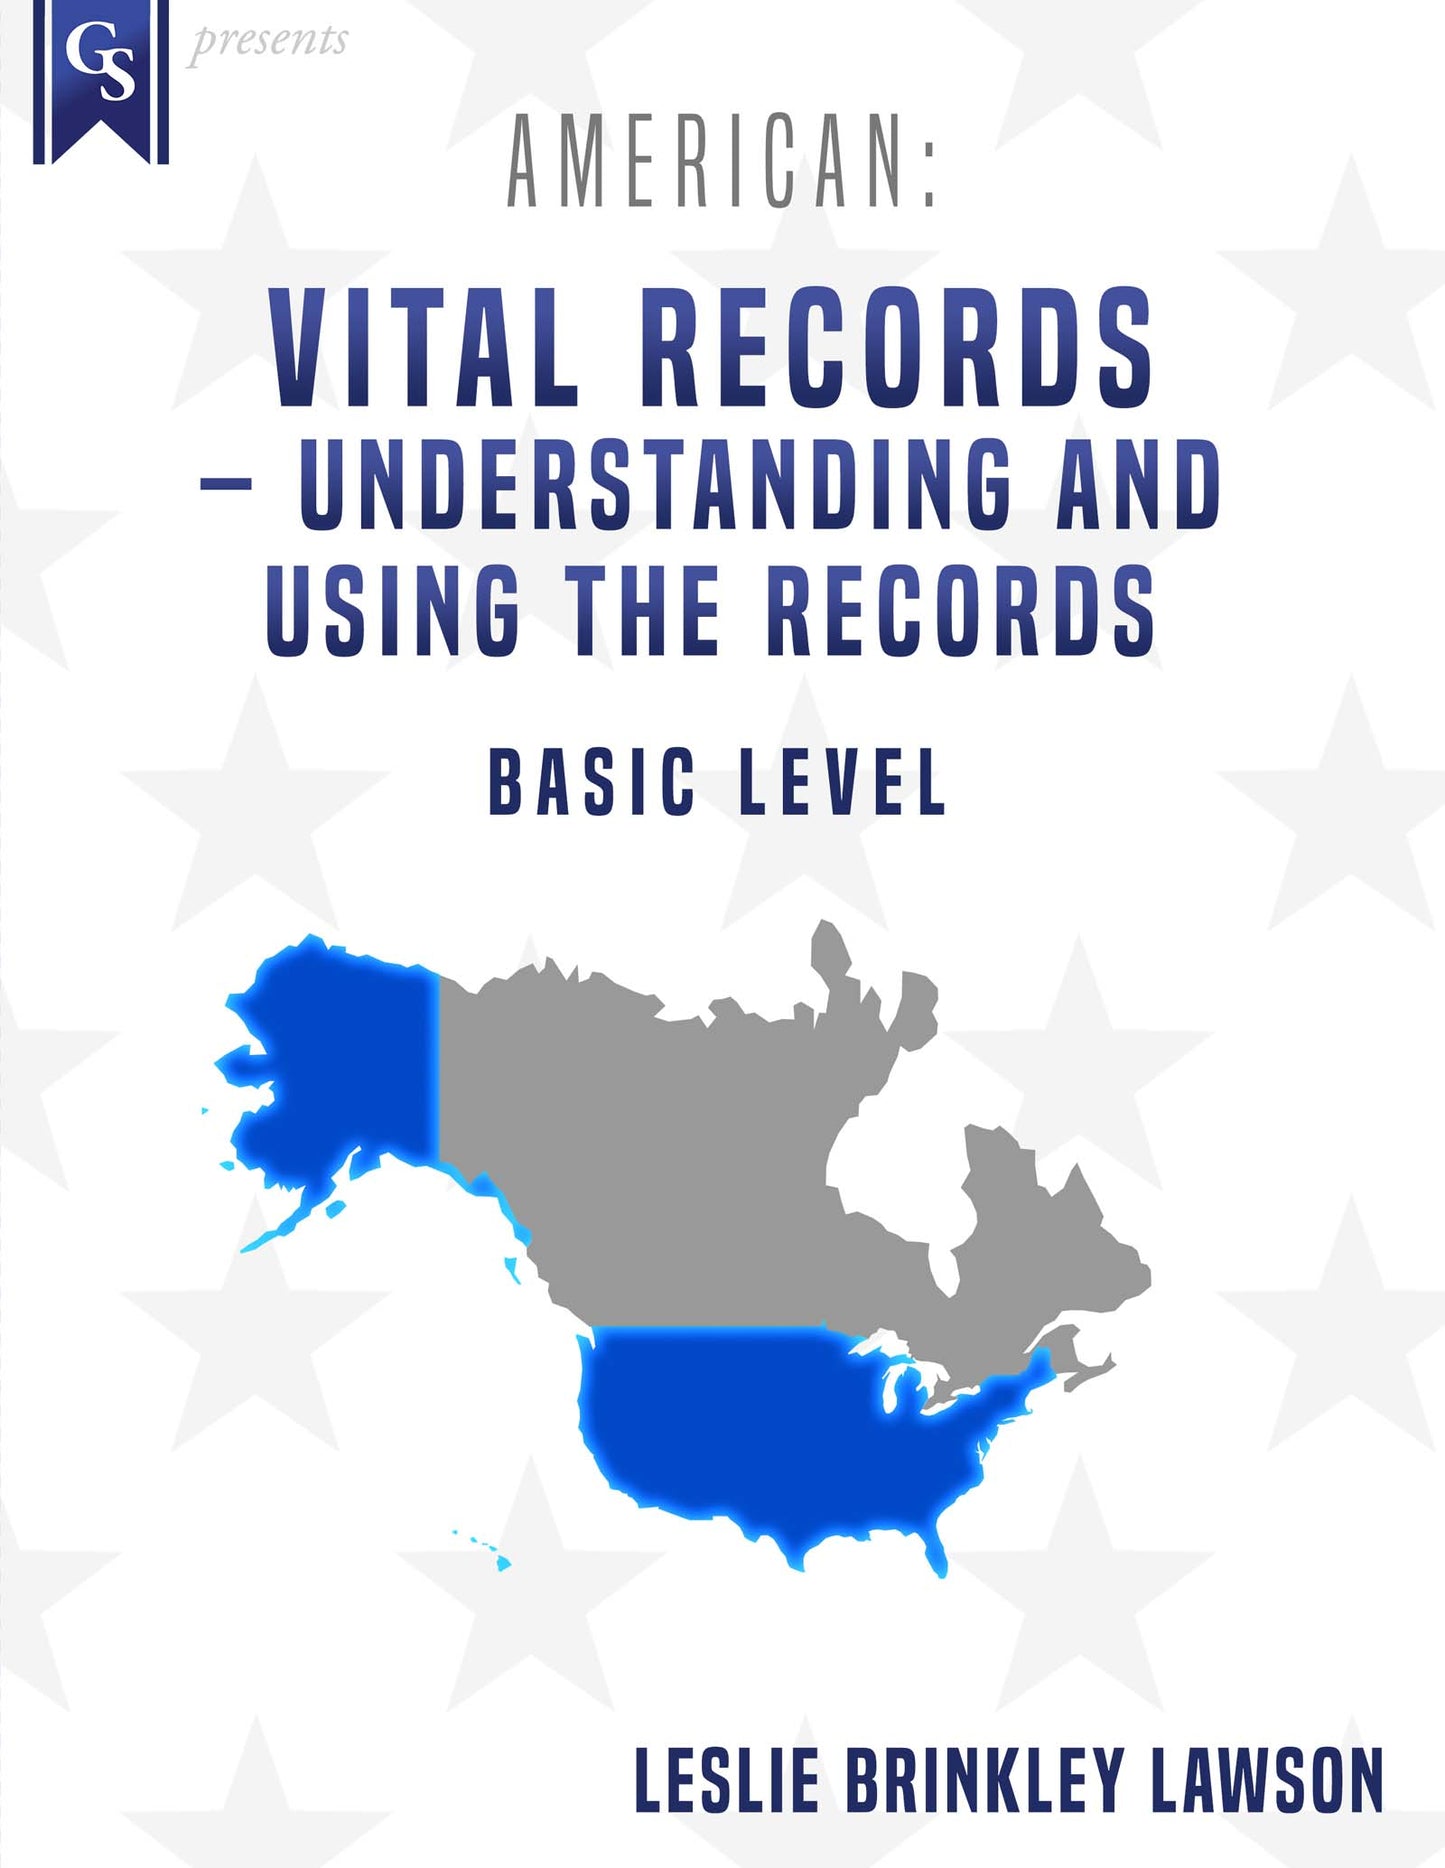 Printed Course Material-American: Vital Records - Understanding and Using The Records